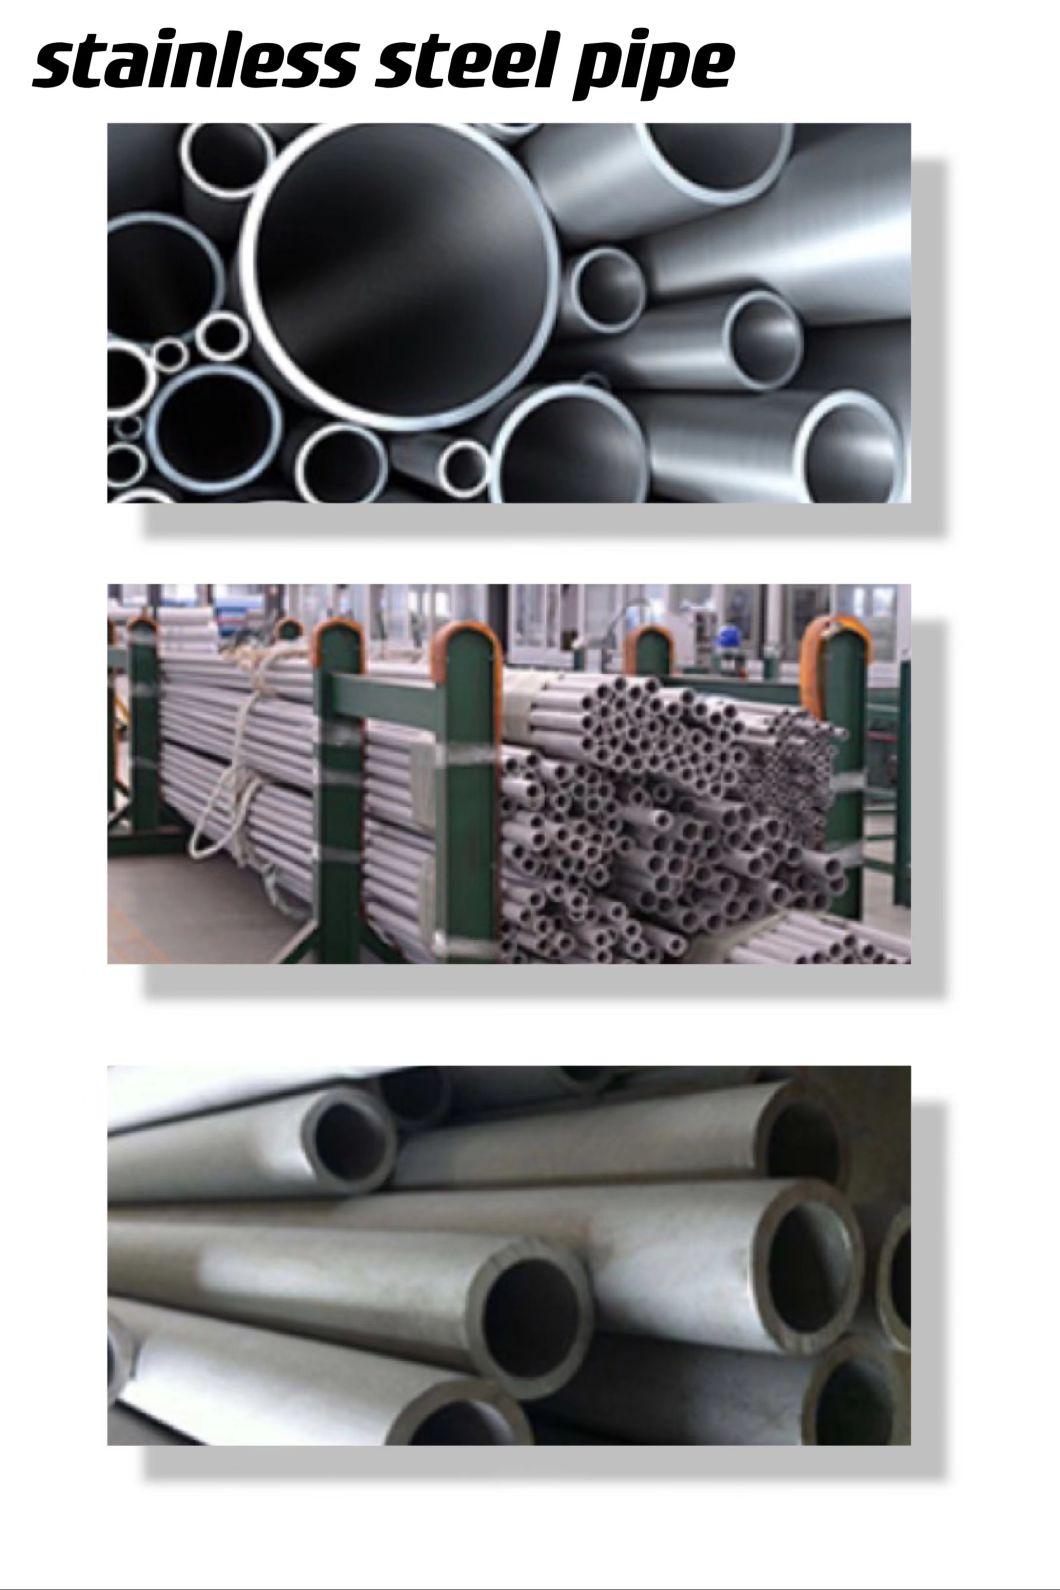 Original Stainless Steel Pipe Made of 316L